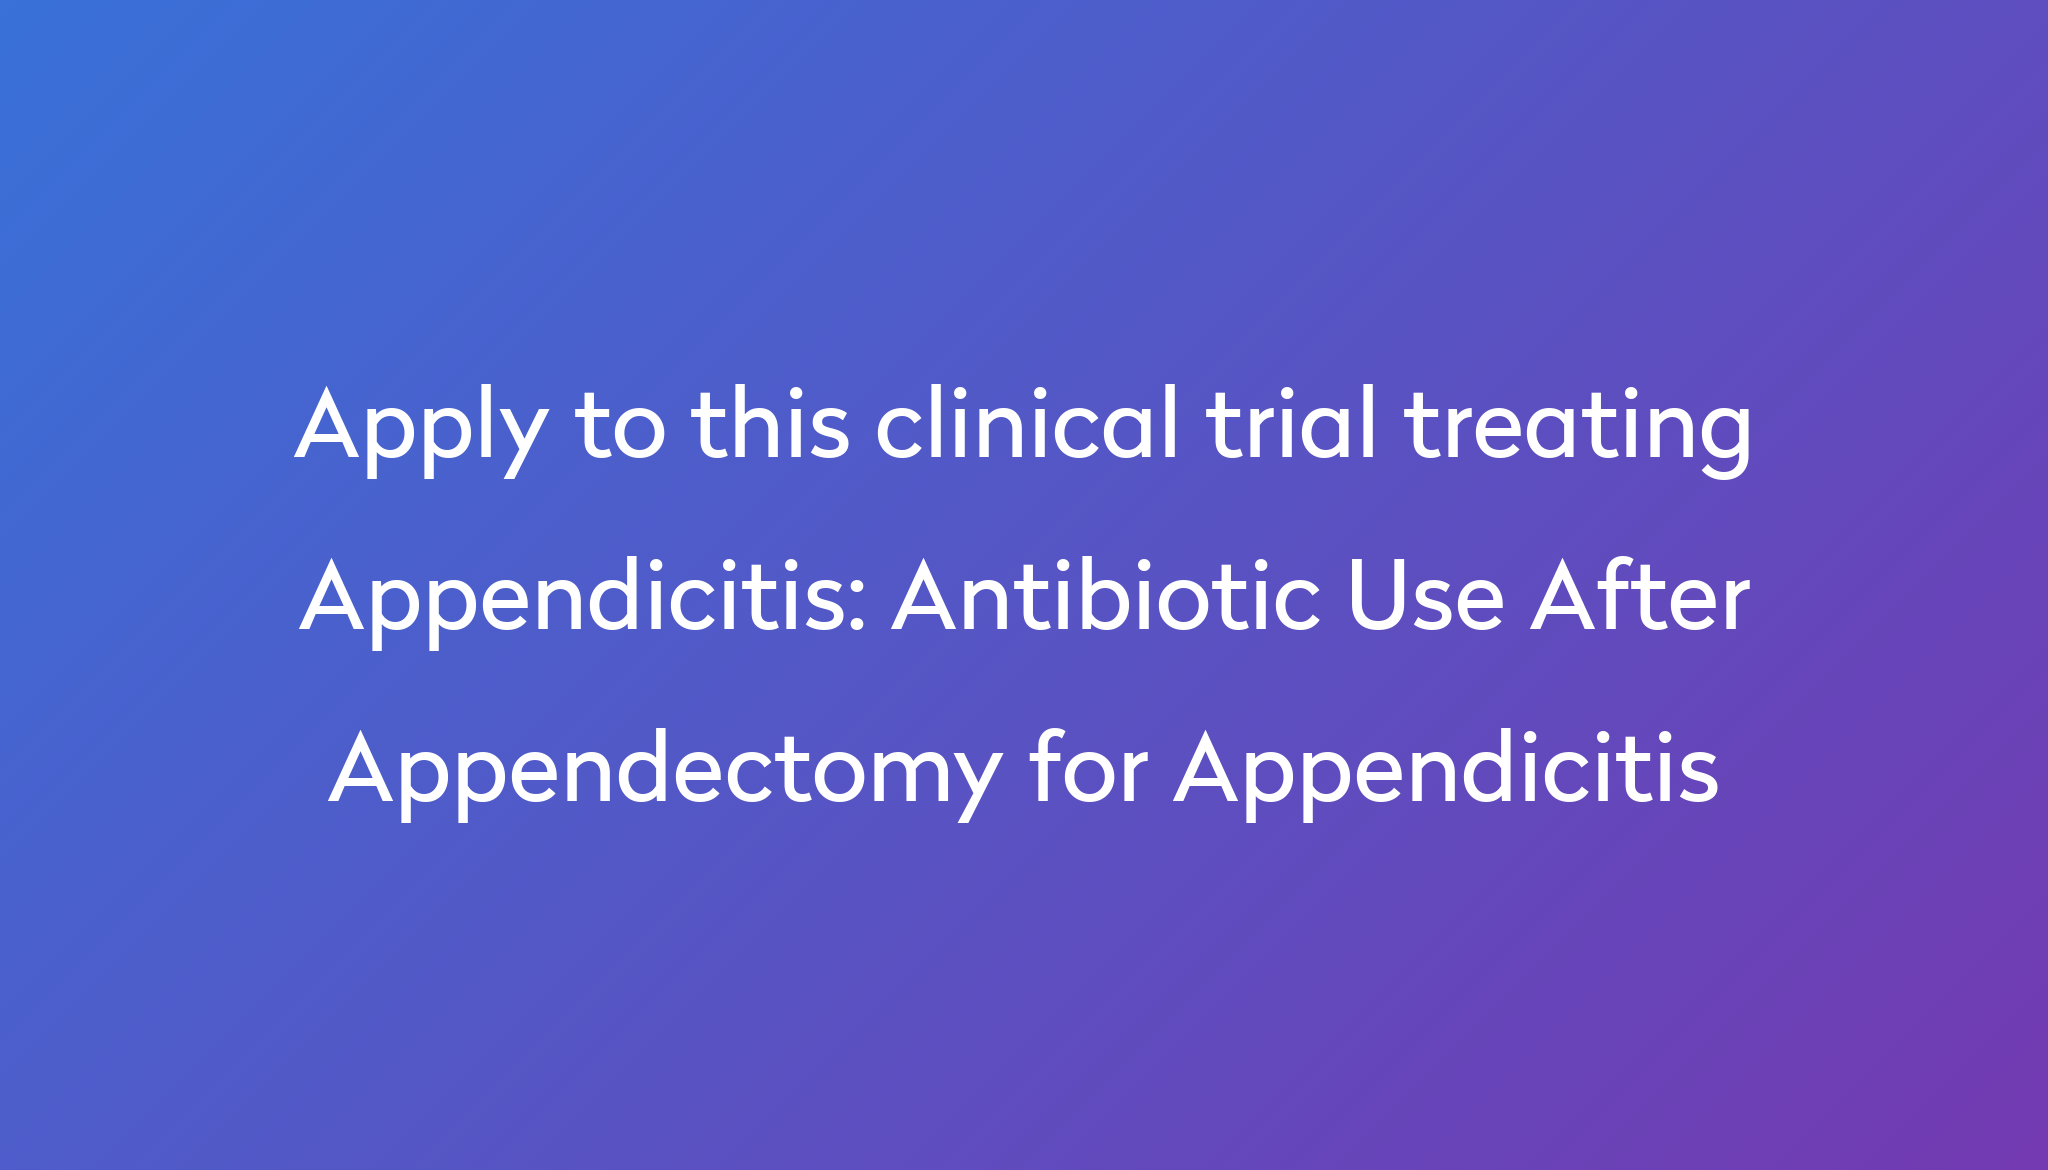 Antibiotic Use After Appendectomy For Appendicitis Clinical Trial 2024